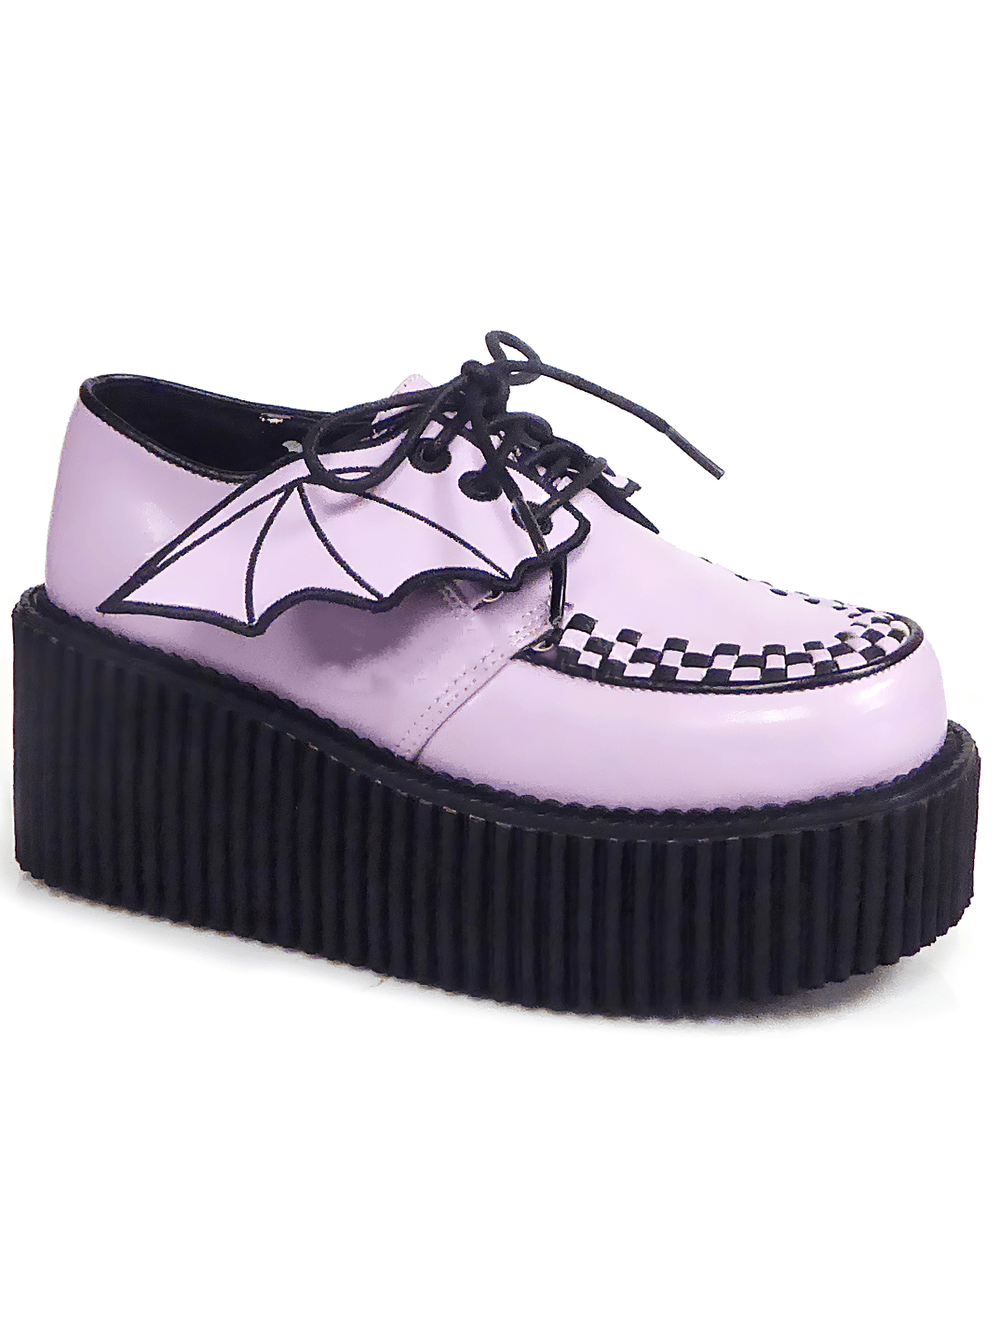 DEMONIA Gothic Platform Creepers with Detachable Bat Wings